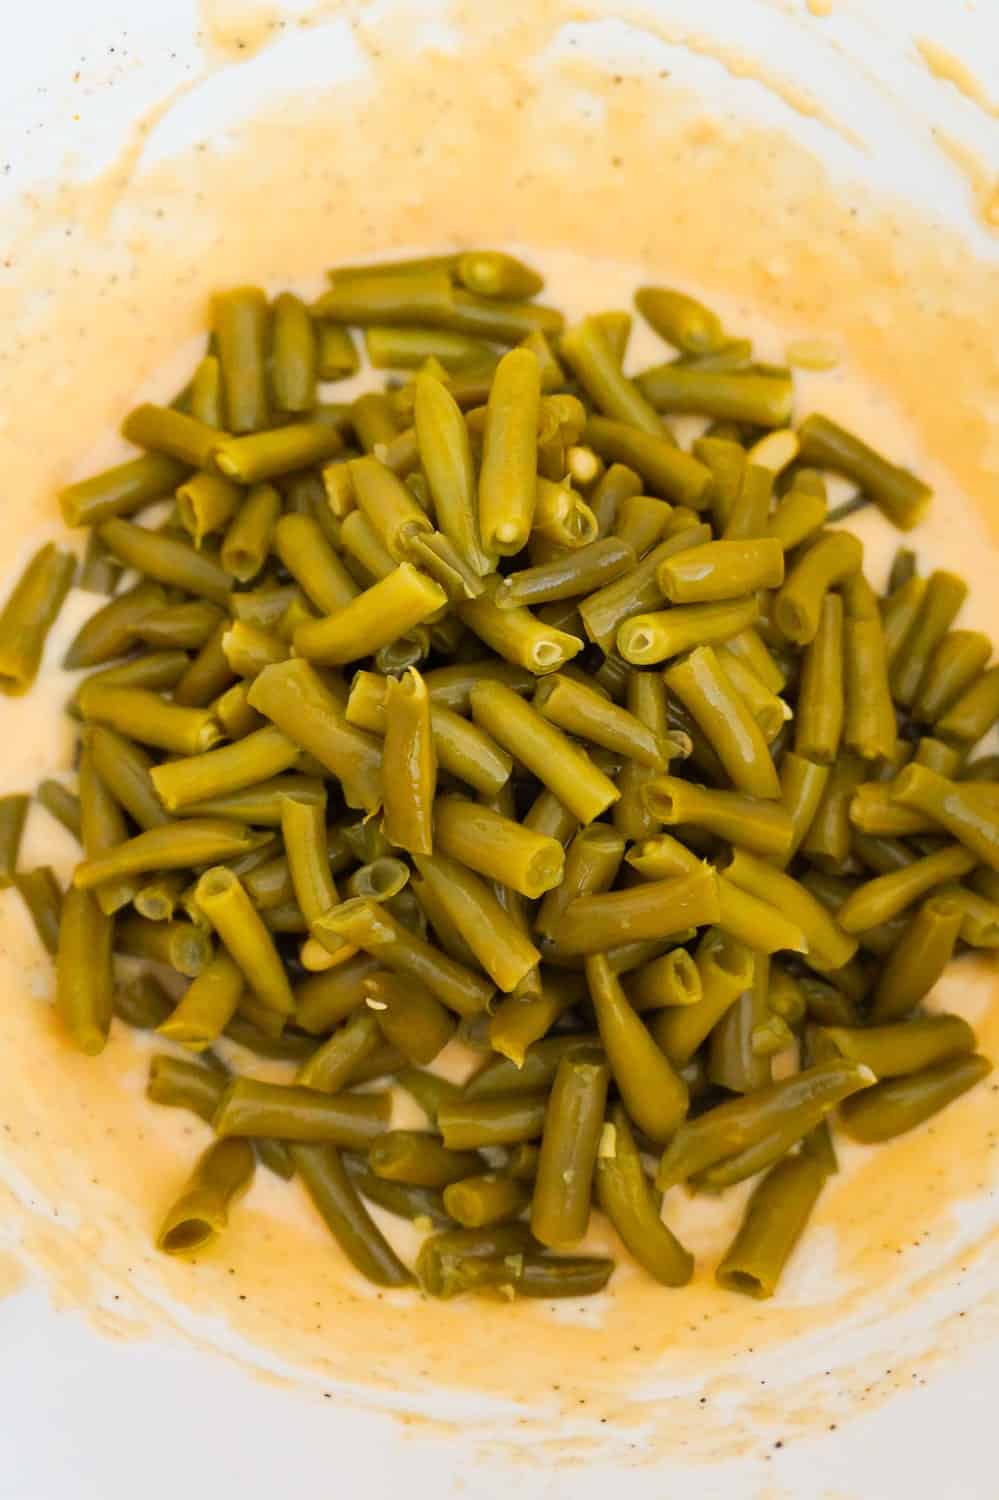 canned cut green beans on top of cheese soup mixture in a mixing bowl